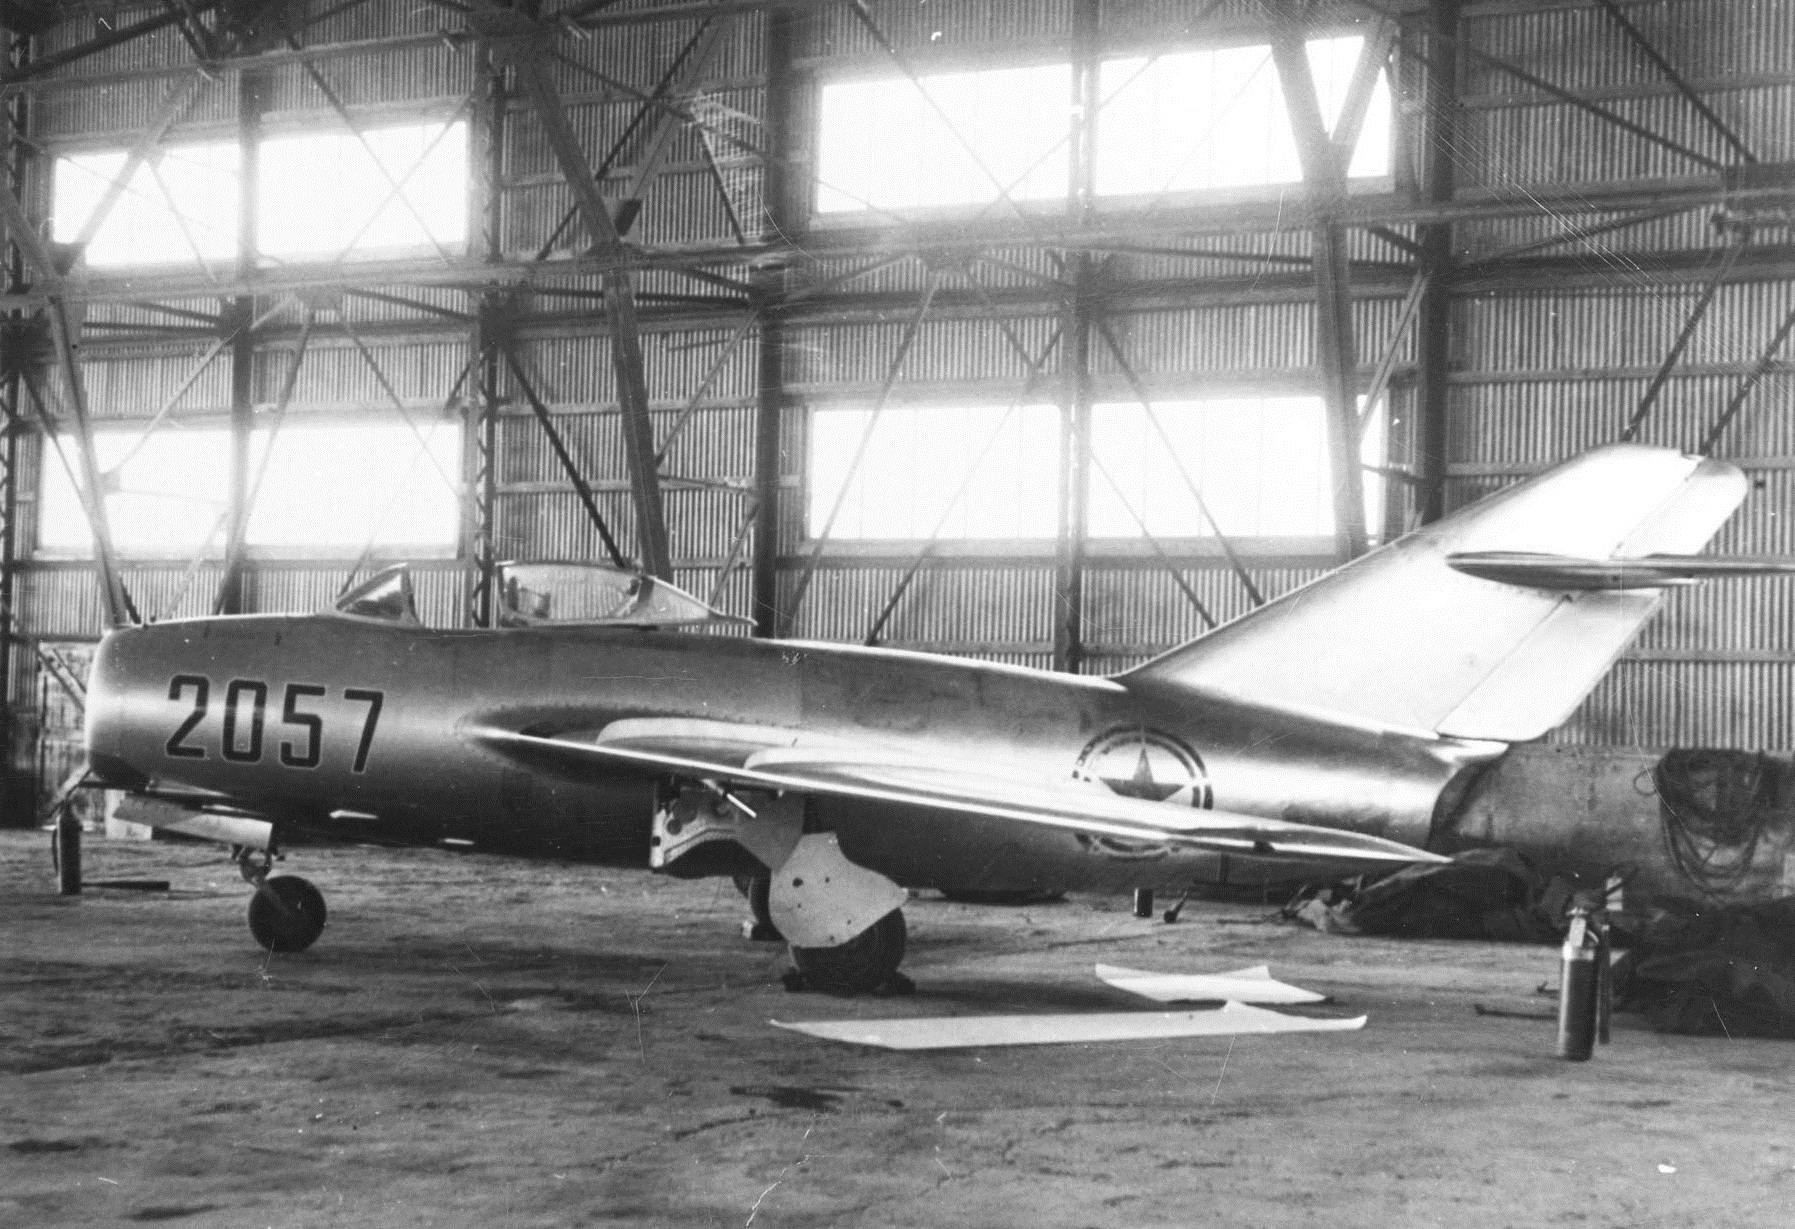 A Mikoyan-Gurevich MiG-15bis in a hangar at Kimpo Air Base, South Korea. A defecting North Korean pilot, Lieutenant No Kum-Sok, flew it to Kimpo, 21 September 1953. It was examined and test flown by Air Force test pilot Major Charles E. Yeager. The United States offered to return the airplane, but the offer was ignored. In 1957, the MiG-15 was placed in the collection of the National Museum of the United States Air Force, Wright-Patterson AFB, Ohio. (U.S. Air Force).